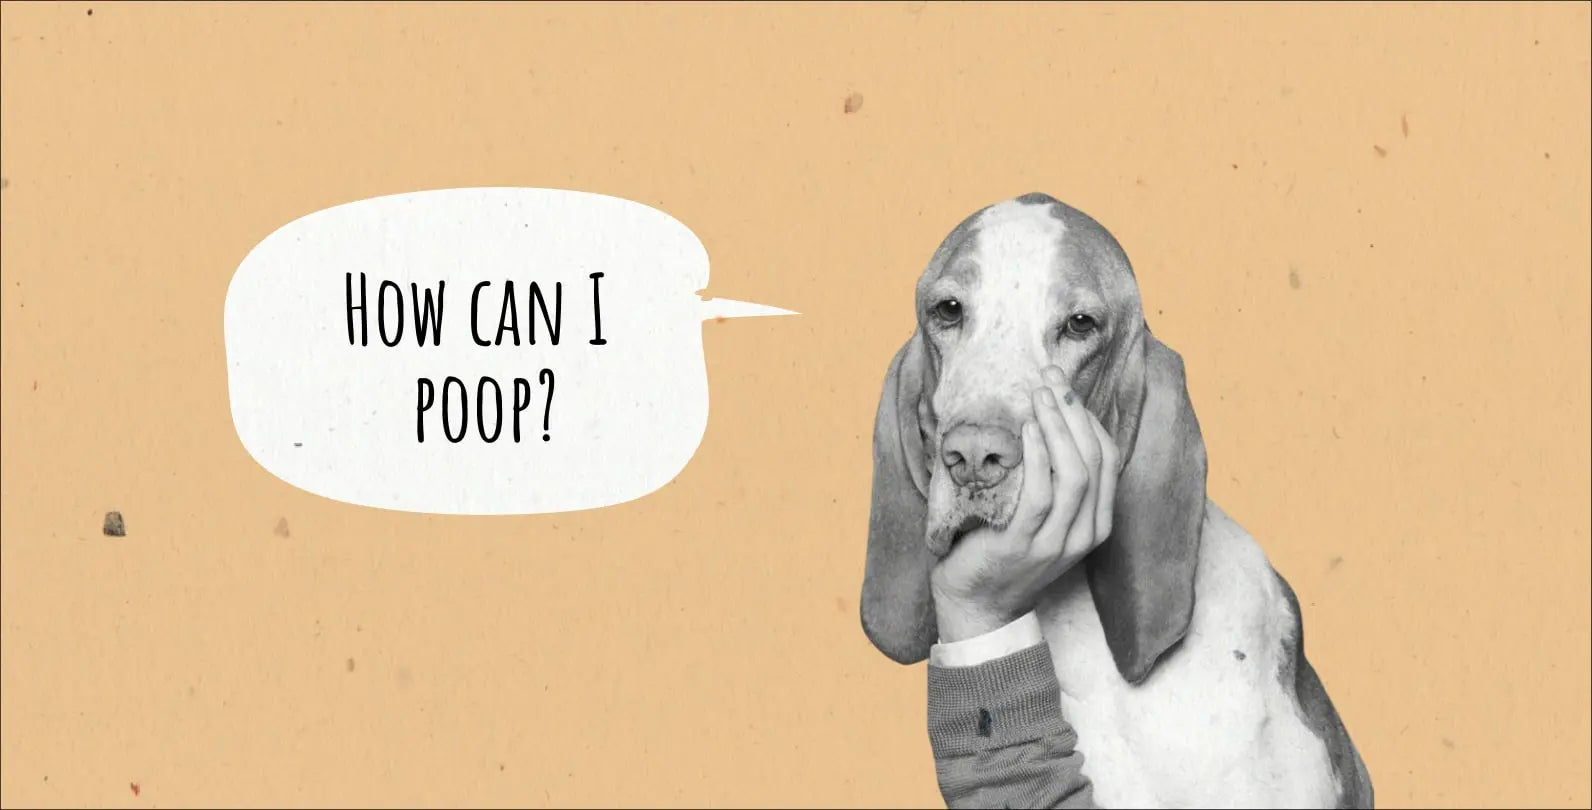 Stuck in a Bind: How to Make a Dog Poop